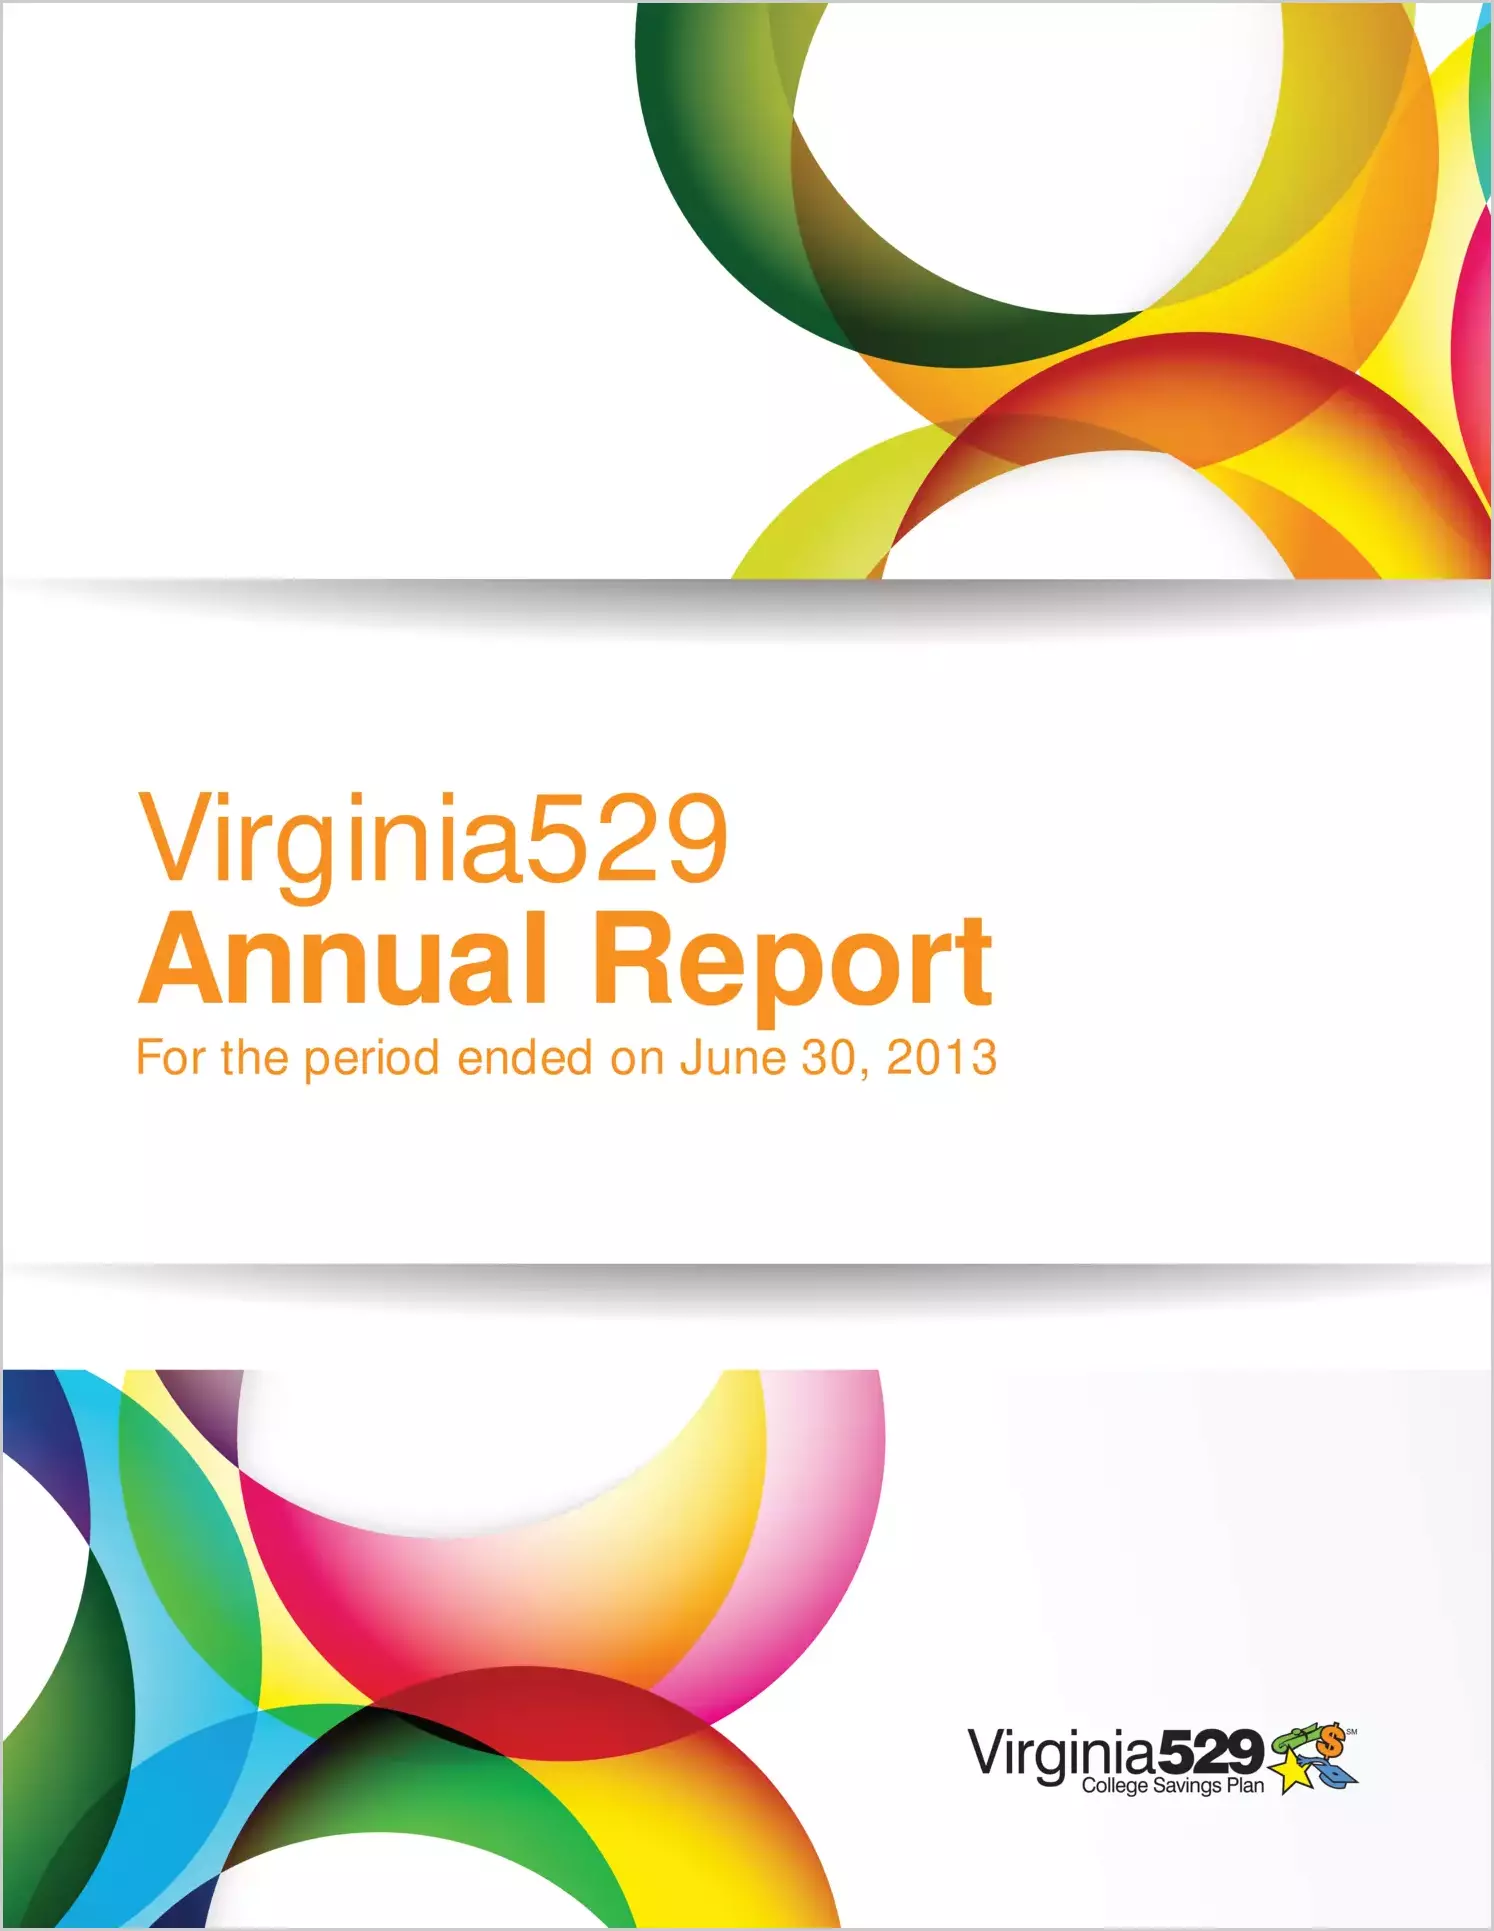 Virginia College Savings Plan Financial Statements for the year ended June 30, 2013